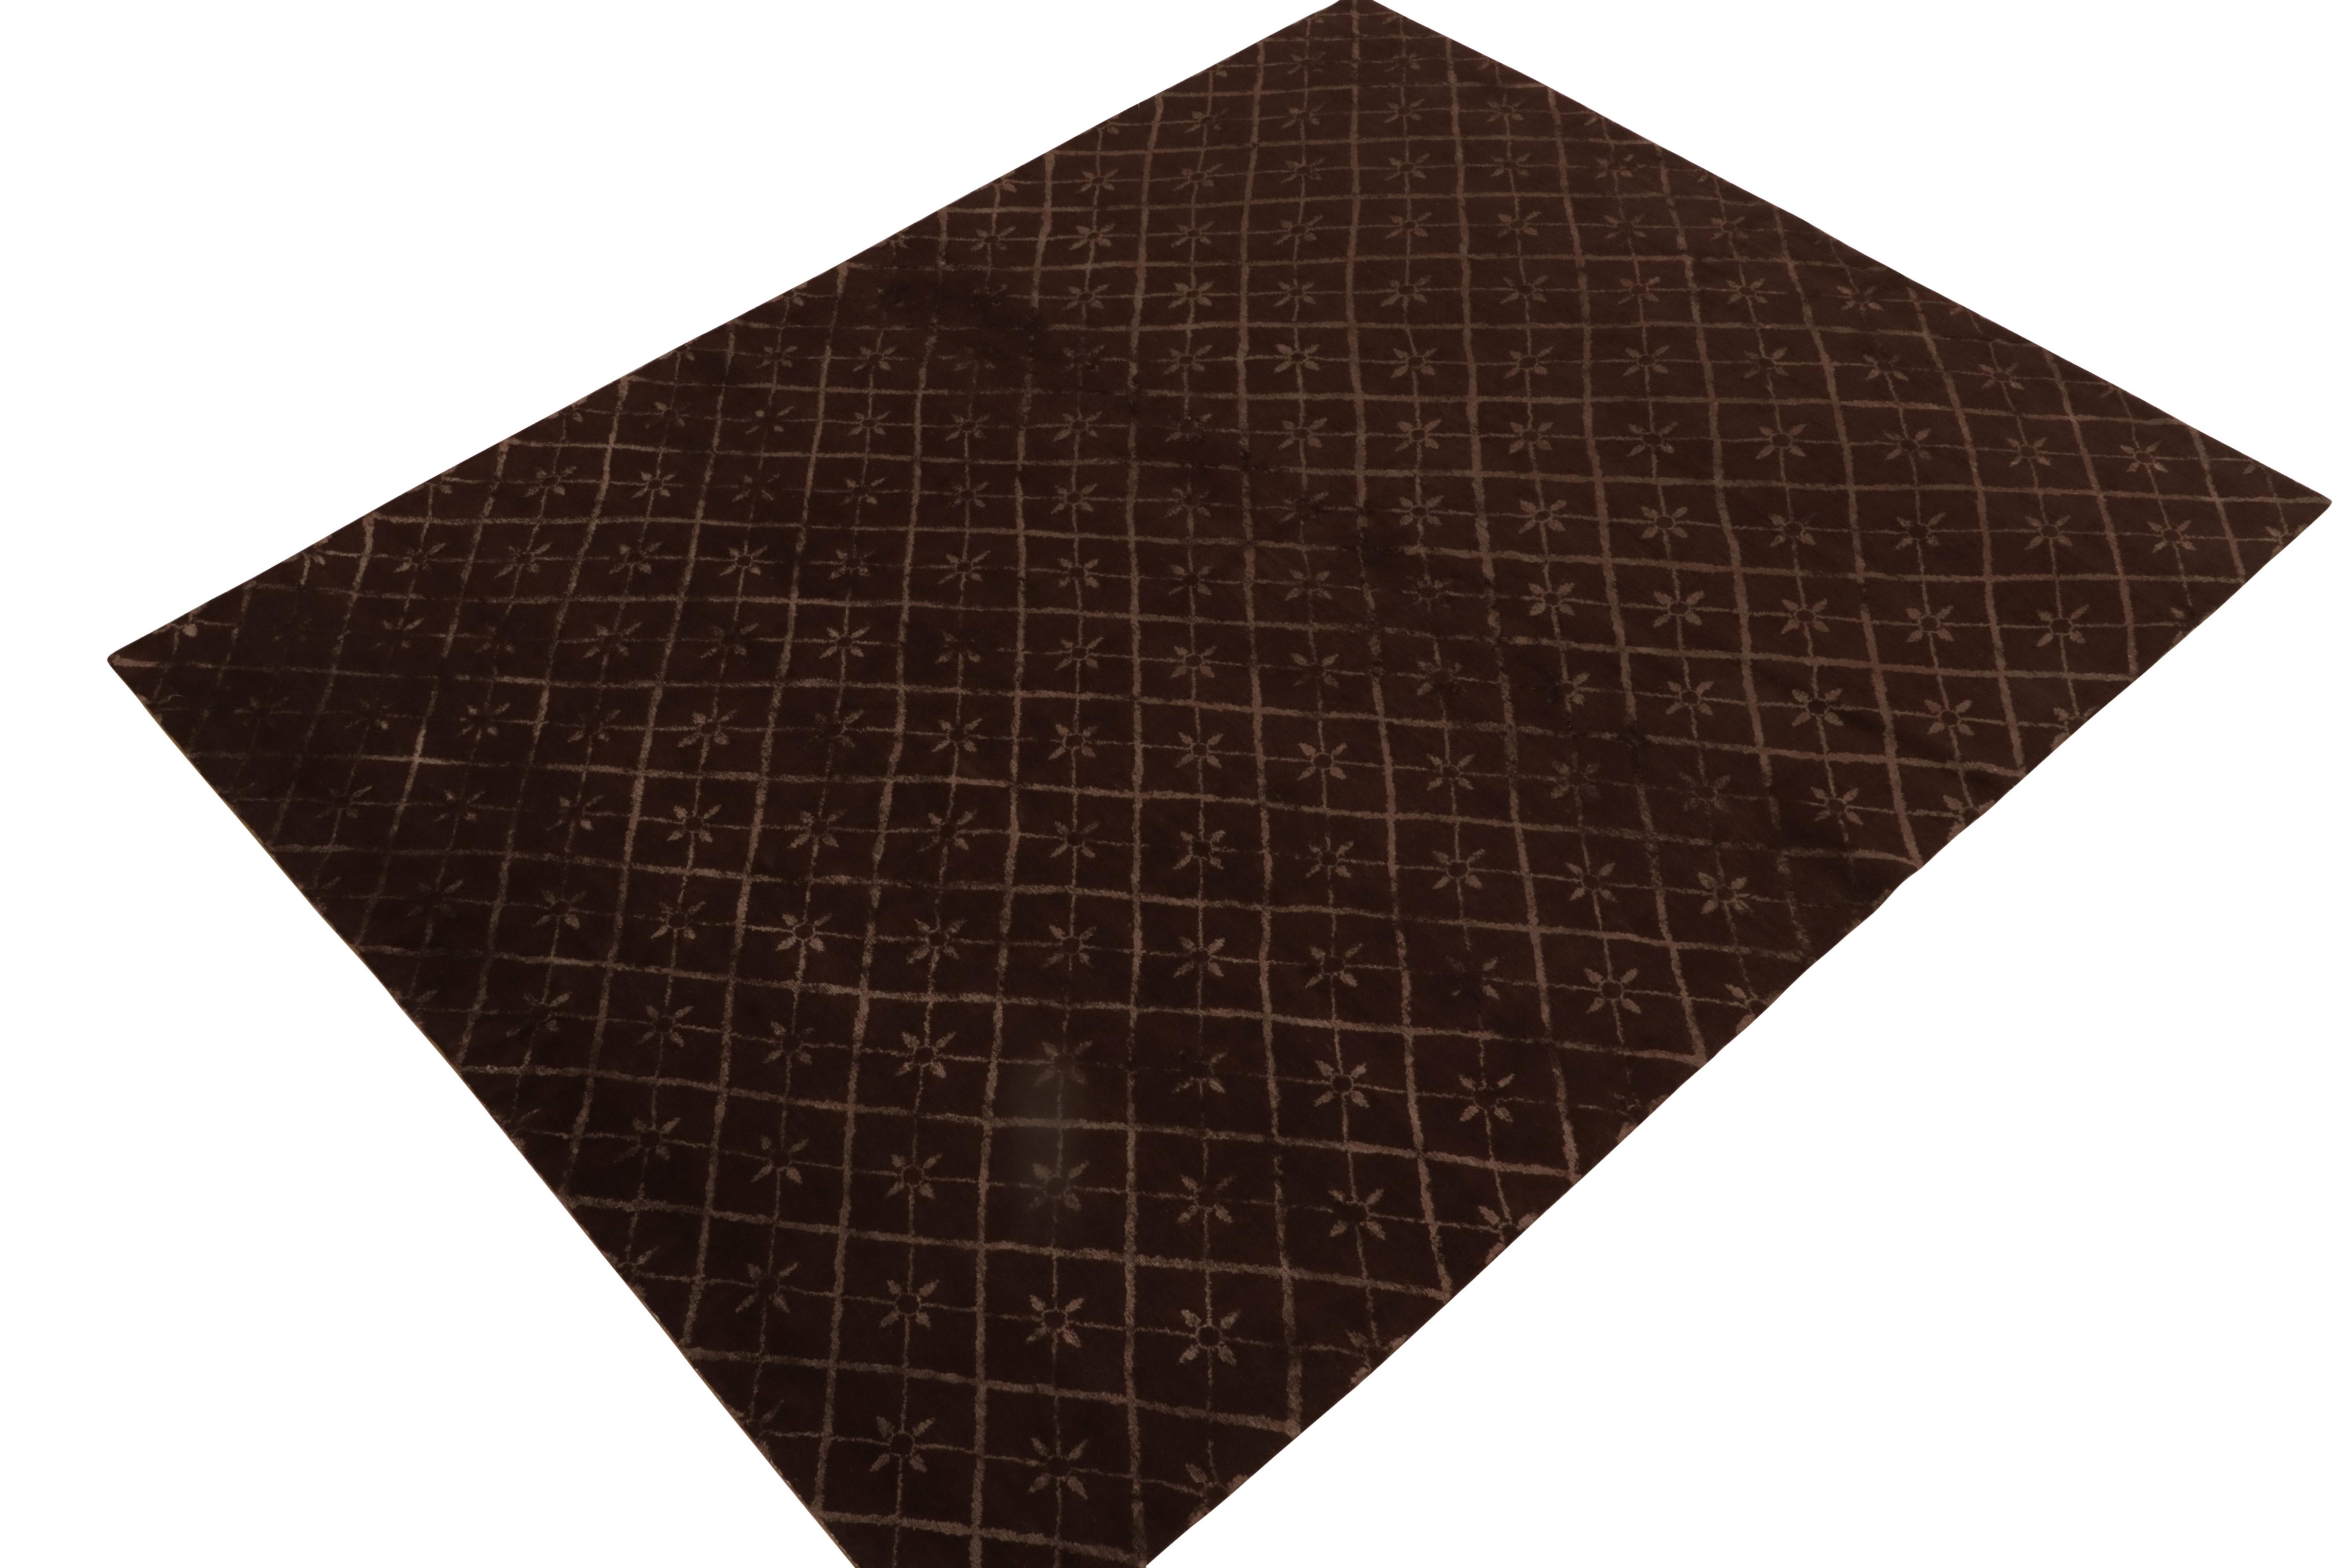 Hand-knotted in wool, an 8x10 rug from our European collection drawing on French Country aesthetics of the Biarritz provenance.

Rich chocolate brown with lighter, walnut brown hues in the lattice geometric pattern offers a smart and cozy